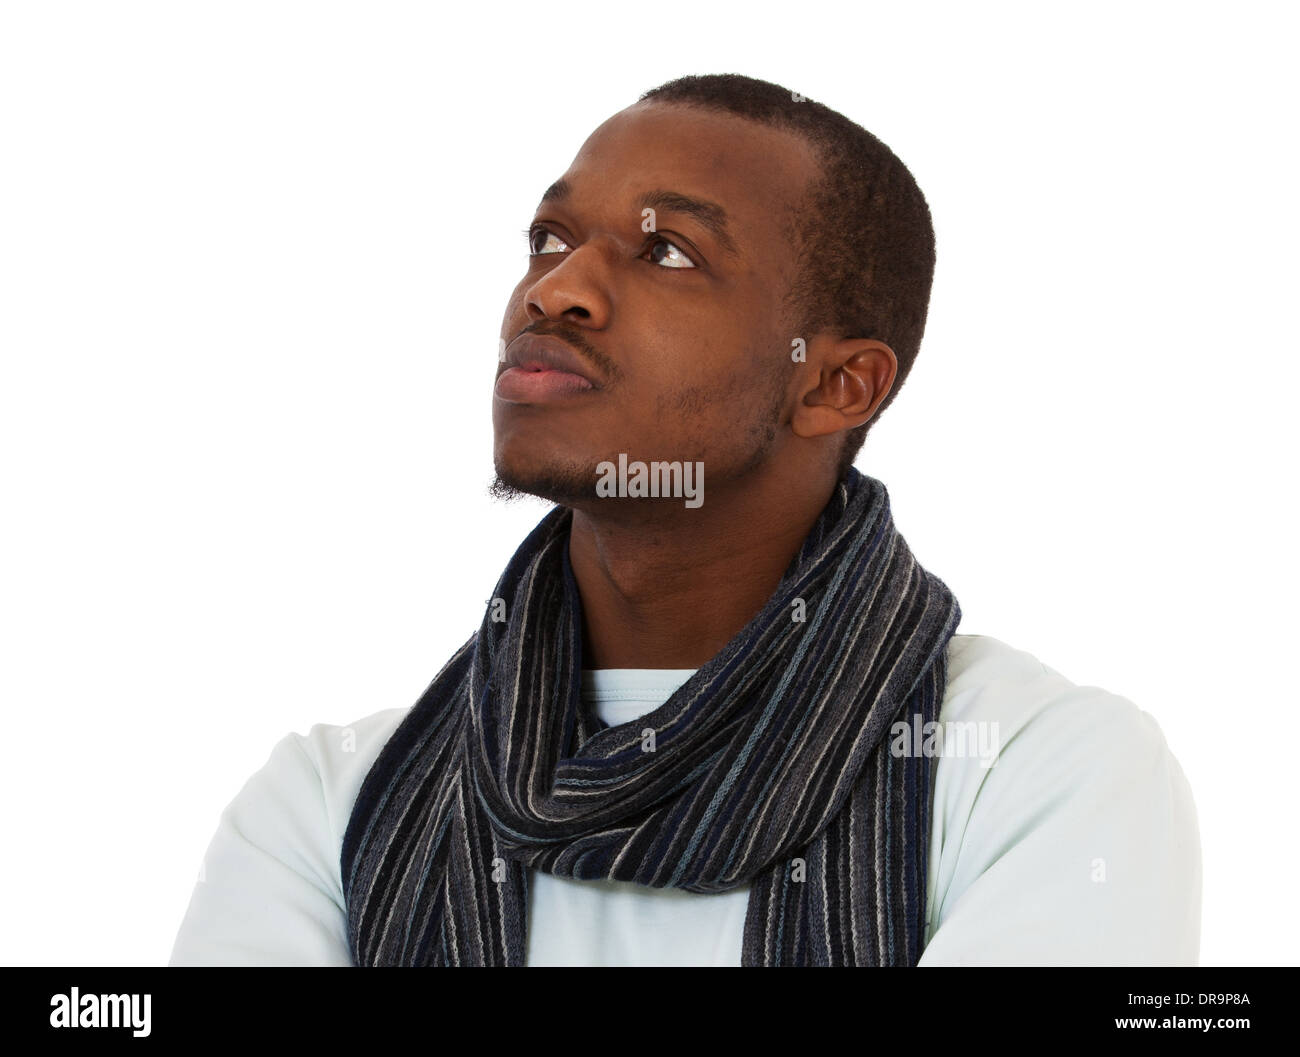 Attractive black guy. All on white background. Stock Photo